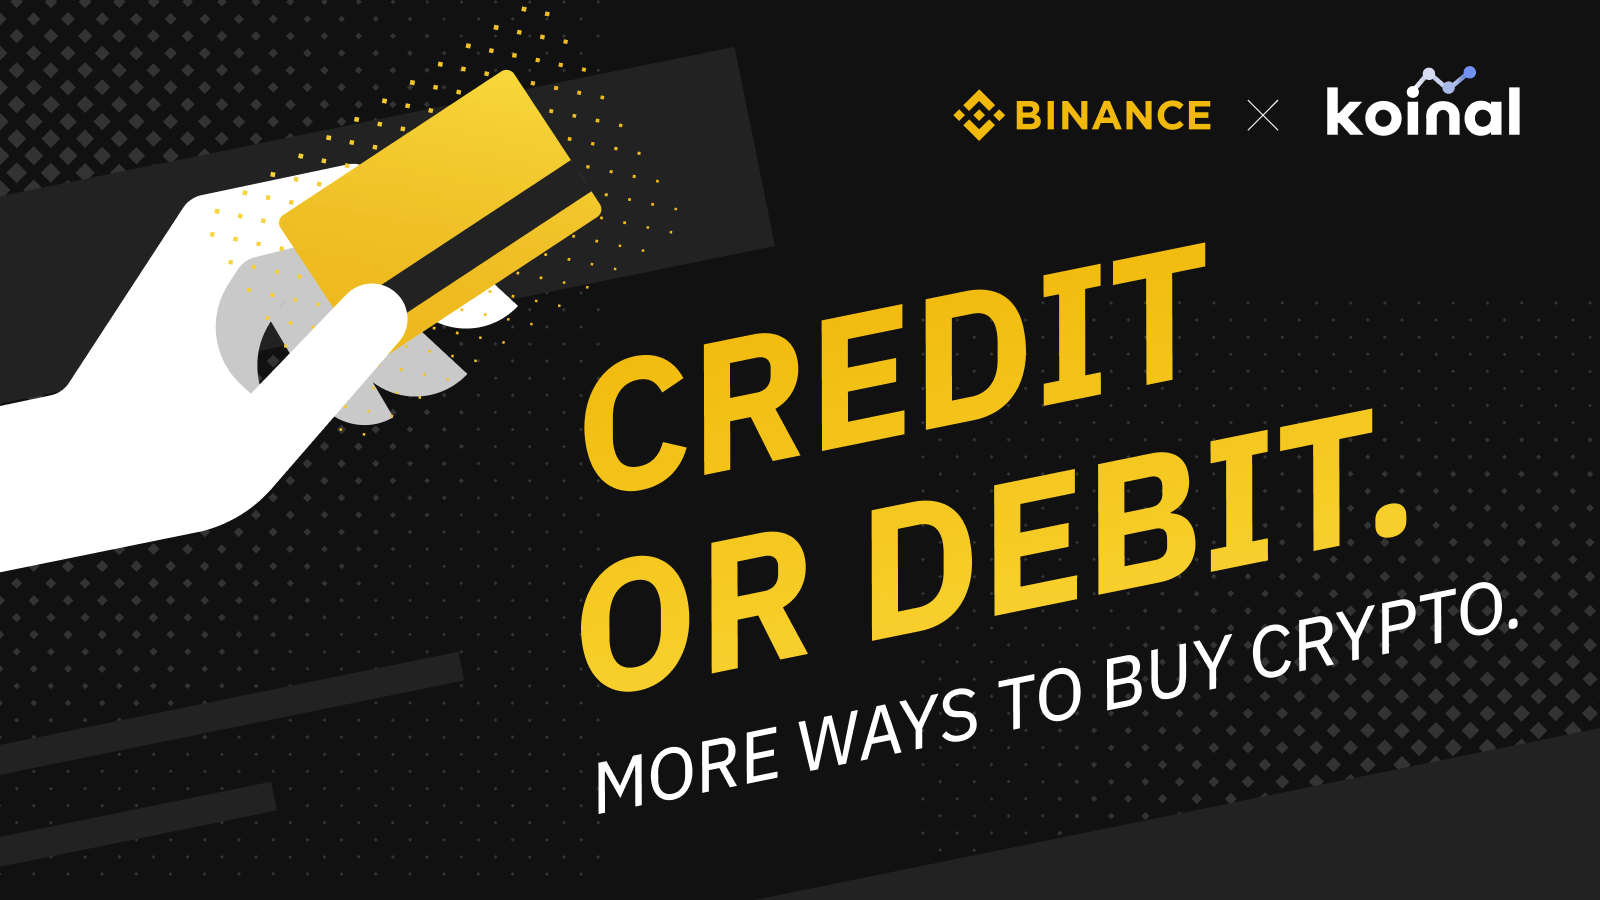 Binance partners with Koinal to offer crypto credit card ...